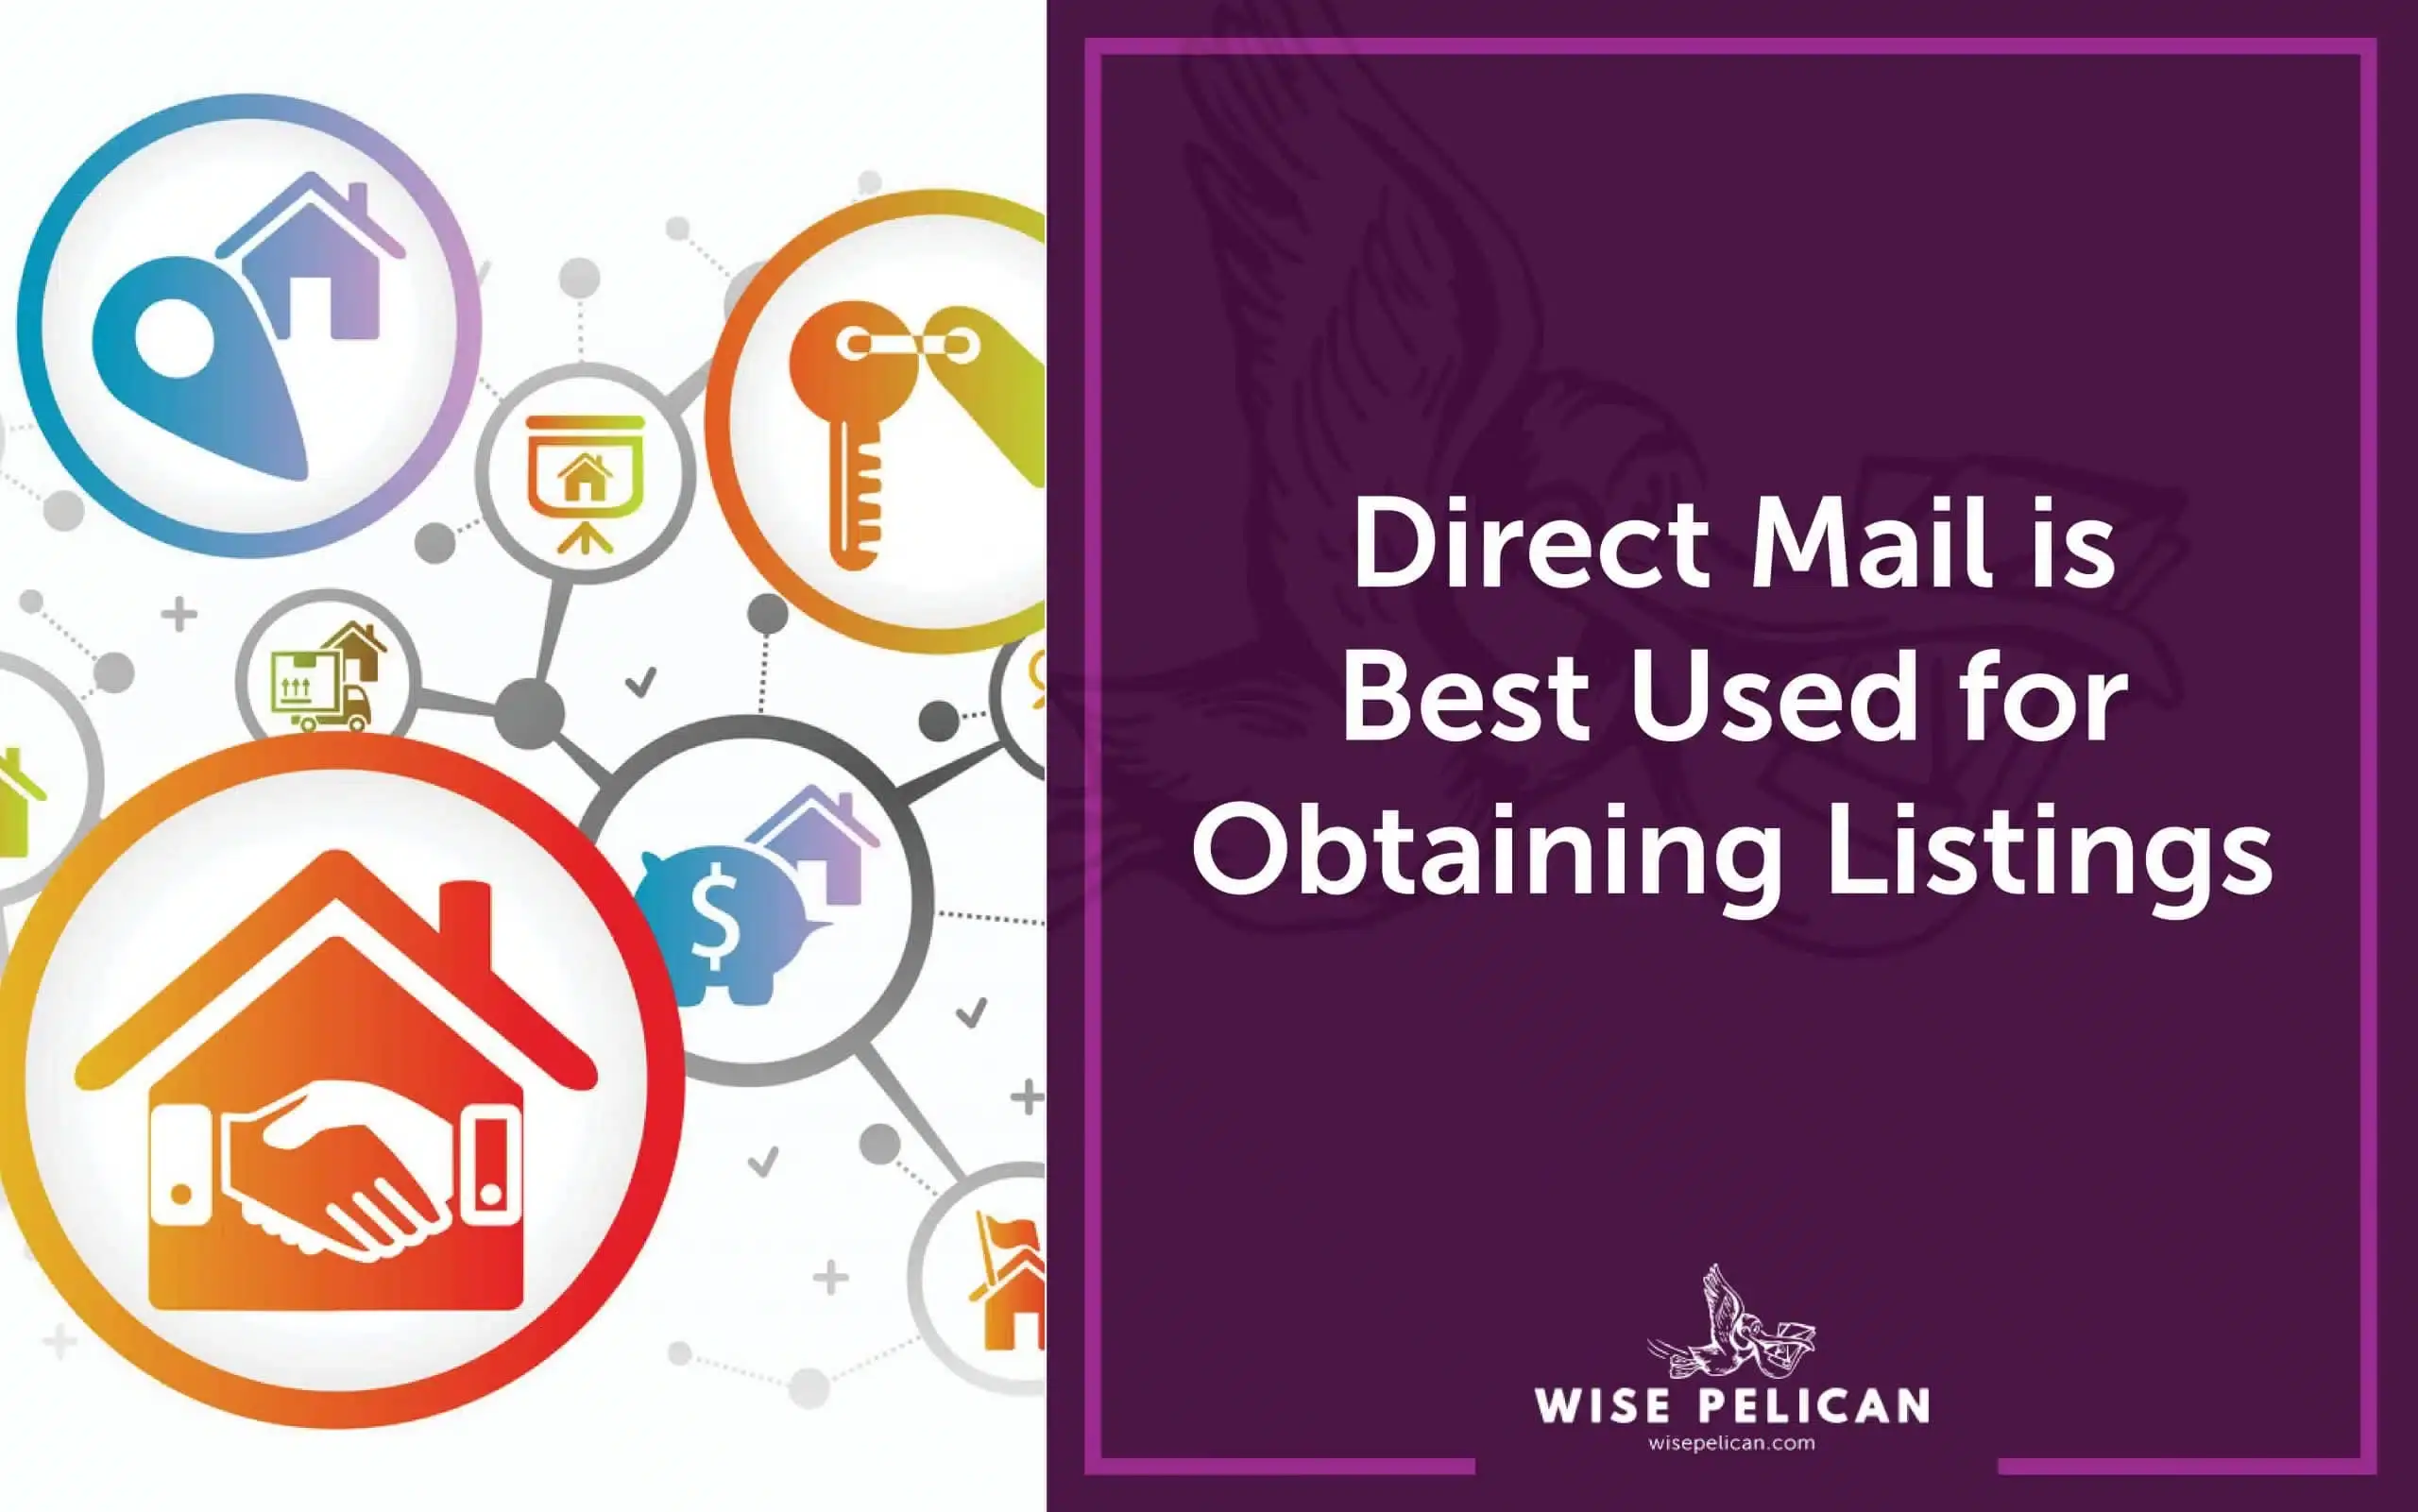 Direct Mail Leads: Obtaining Listings